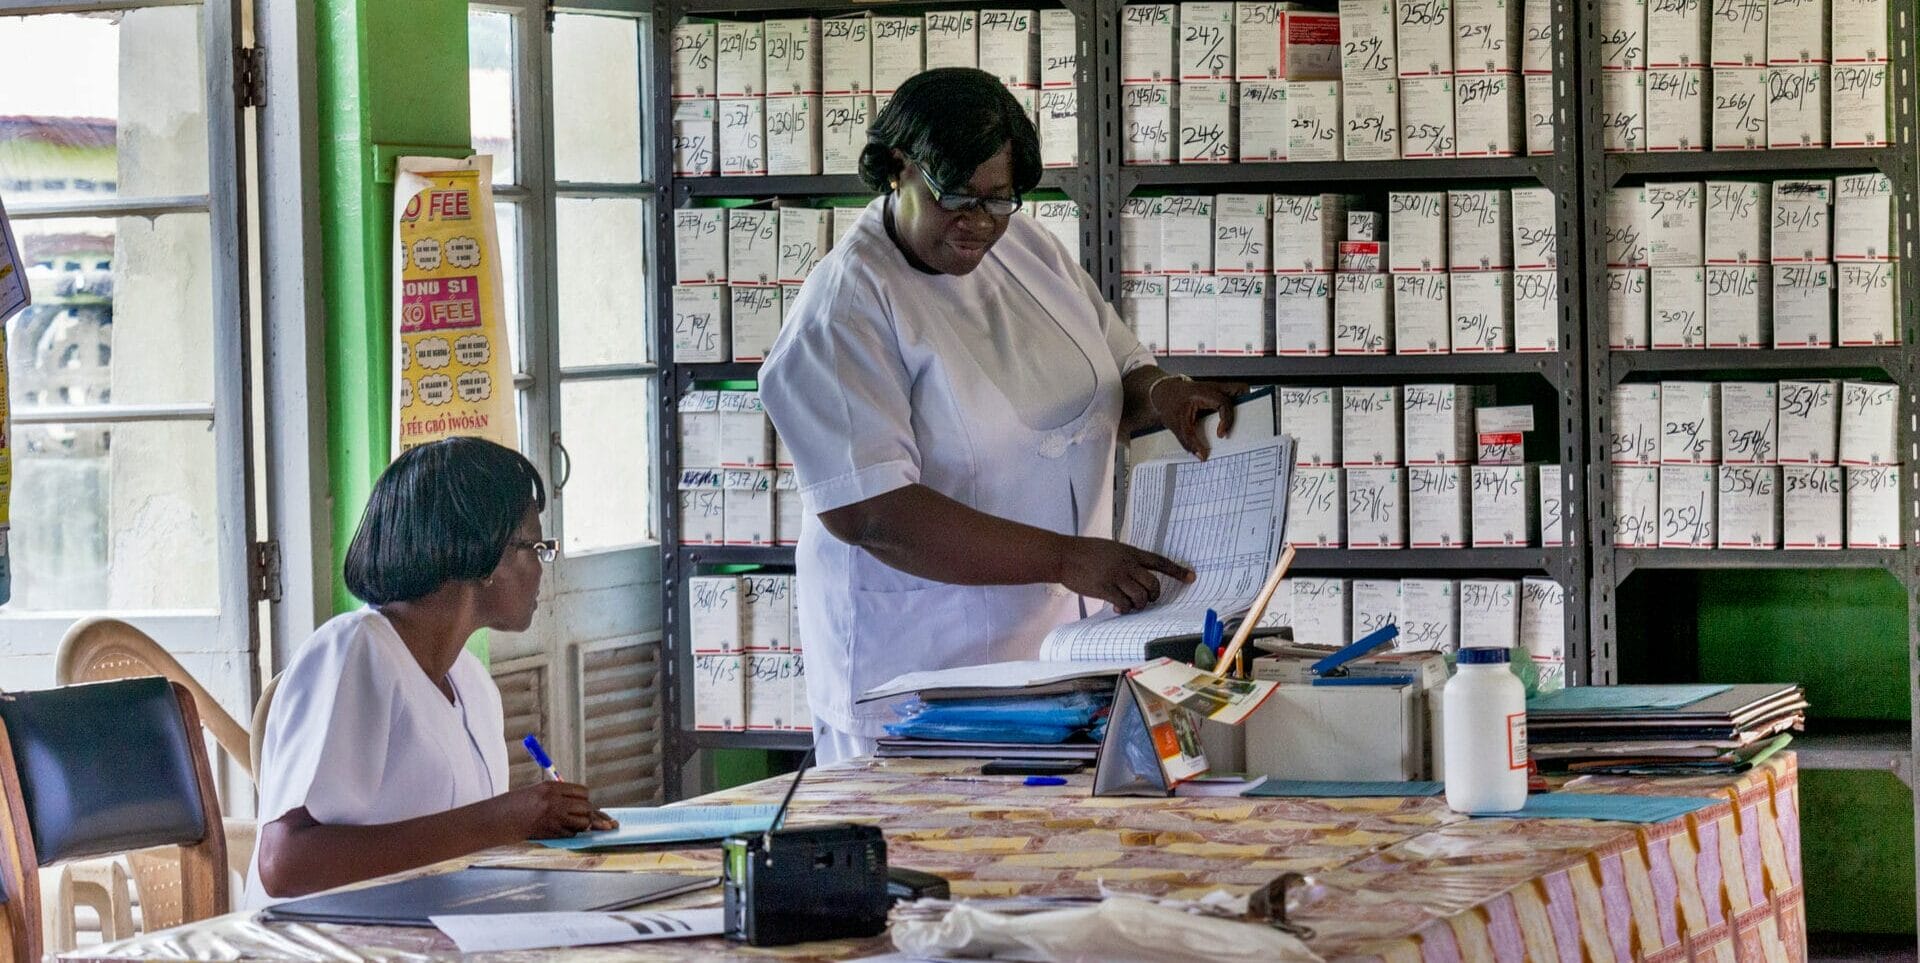 Nurses at work at a tuberculosis hospital in Ibadan, Nigeria. 

In 2016, the Global Fund, Nigerian government and other key partners initiated the National Supply Chain Integration Project (NSCIP) to address the country’s health product supply chain challenges. Issues included, parallel supply chains, low capacity and inadequate reporting, inefficiencies due to poor coordination and sub-standard warehousing. These challenges resulted in frequent stock-outs, poor availability of medicines, millions of dollars in expired drugs, and long lead times. 

The Nigerian government and donors recognized a concerted effort was needed to integrate supply chains and deliver structural change. Together with the government, the Global Fund and donors targeted efforts to improve data visibility, coordinate government authorities, optimize warehousing and distribution networks, and manage supply levels at the State level.

NSCIP has achieved improvements across key supply chain performance areas, and improved visibility has helped in the proactive re-distribution of products before expiry. This means that medicines and health products can reach patients who need them most, when they need them. 

NSCIP demonstrates the key Global Fund principle of country ownership and partnership. The Global Fund continues to work closely with the Nigerian government to further strengthen capacity to ensure full country ownership of the supply chain, supported by third party logistics providers and partners. The success in Nigeria was not an isolated effort; it required tremendous cooperation and coordinated funding with many partners in-country. Without the support of partners, implementation would not have been possible.

The Global Fund / Andrew Esiebo